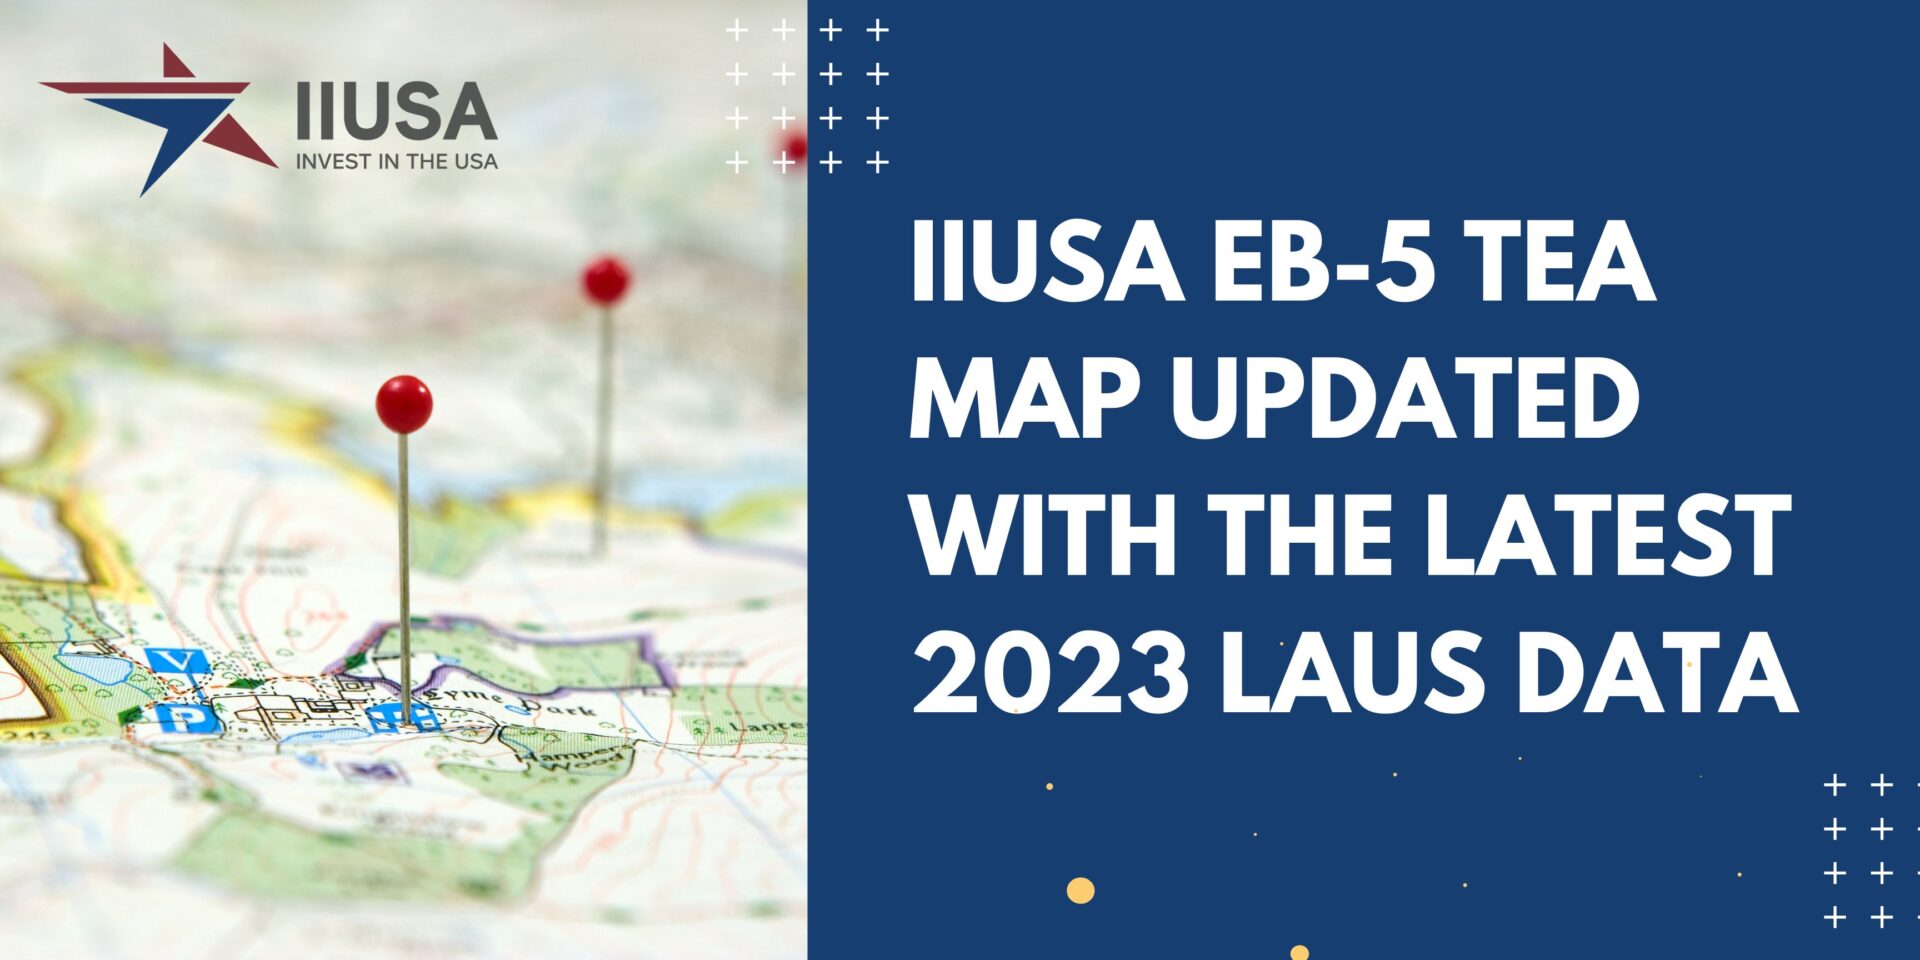 IIUSA EB-5 TEA Map Updated with the Latest 2023 Annual LAUS Data